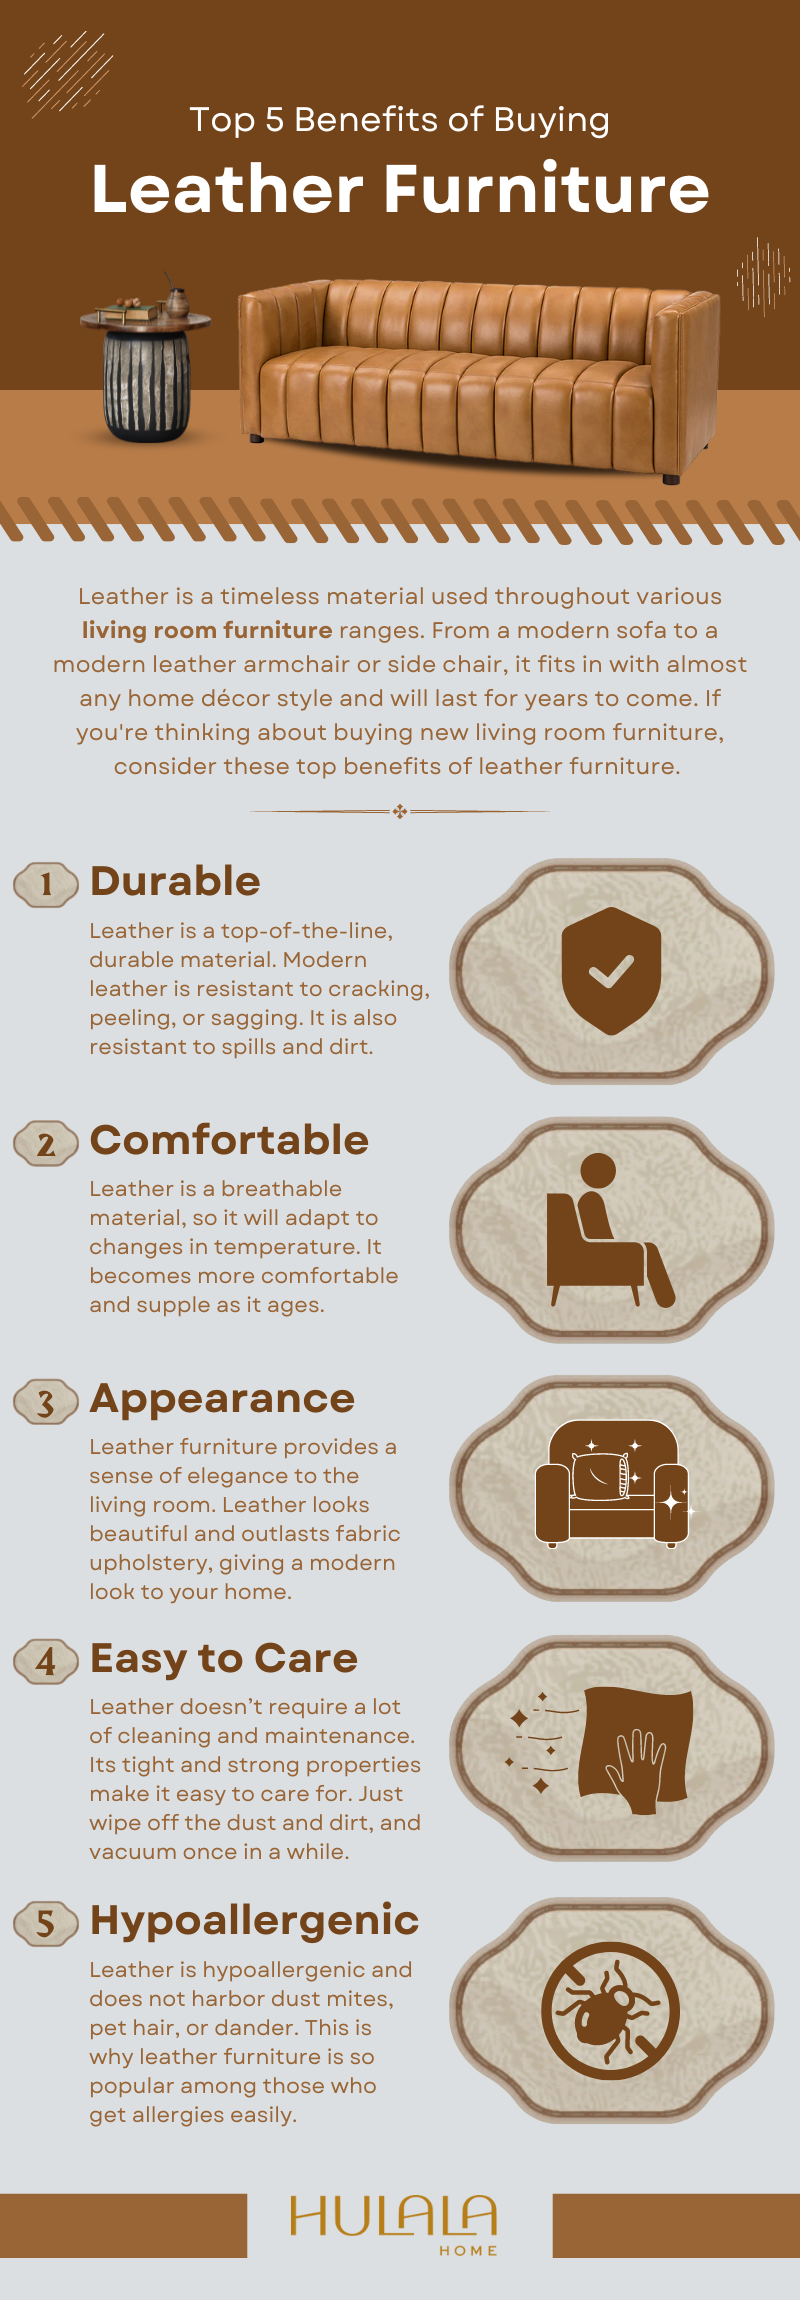 Top 5 Benefits of Buying Leather Furniture